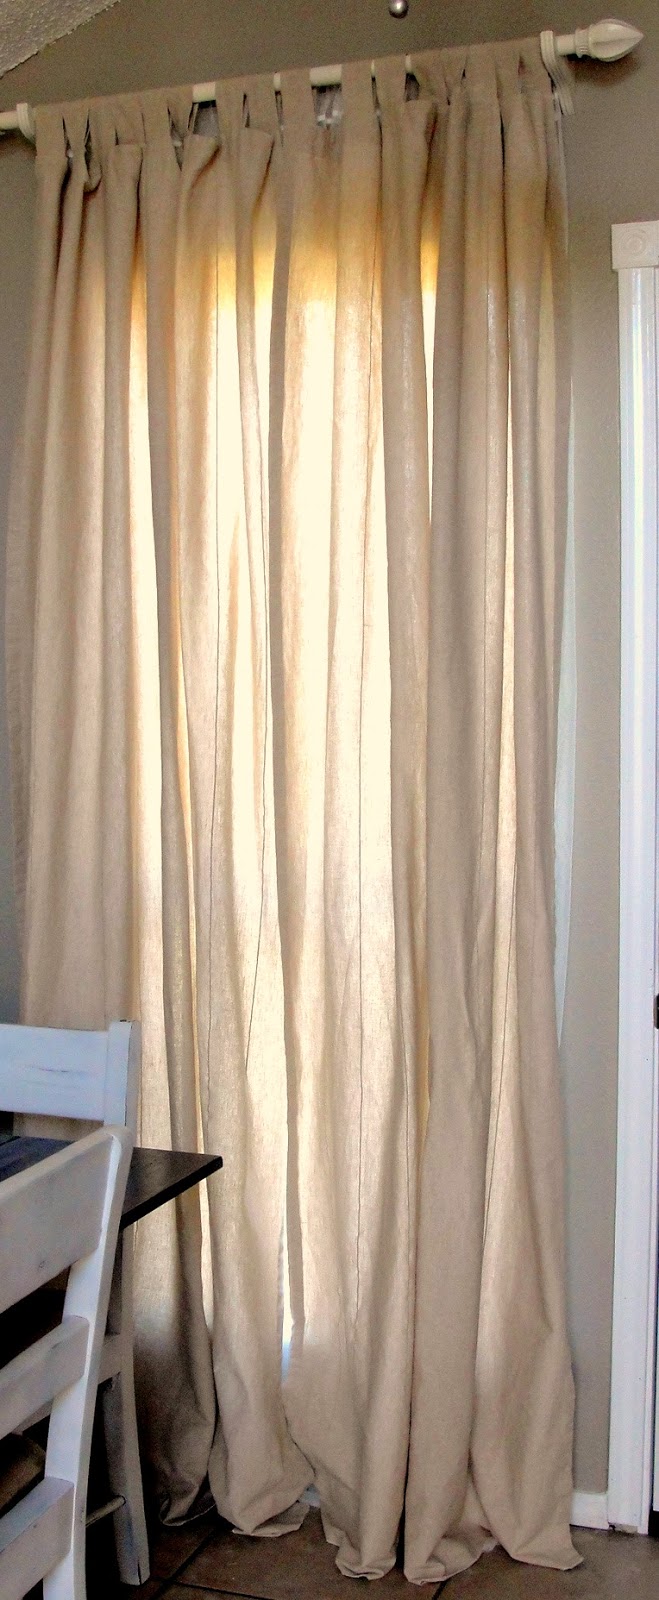  Ikea Curtains  Short Hairstyle 2013